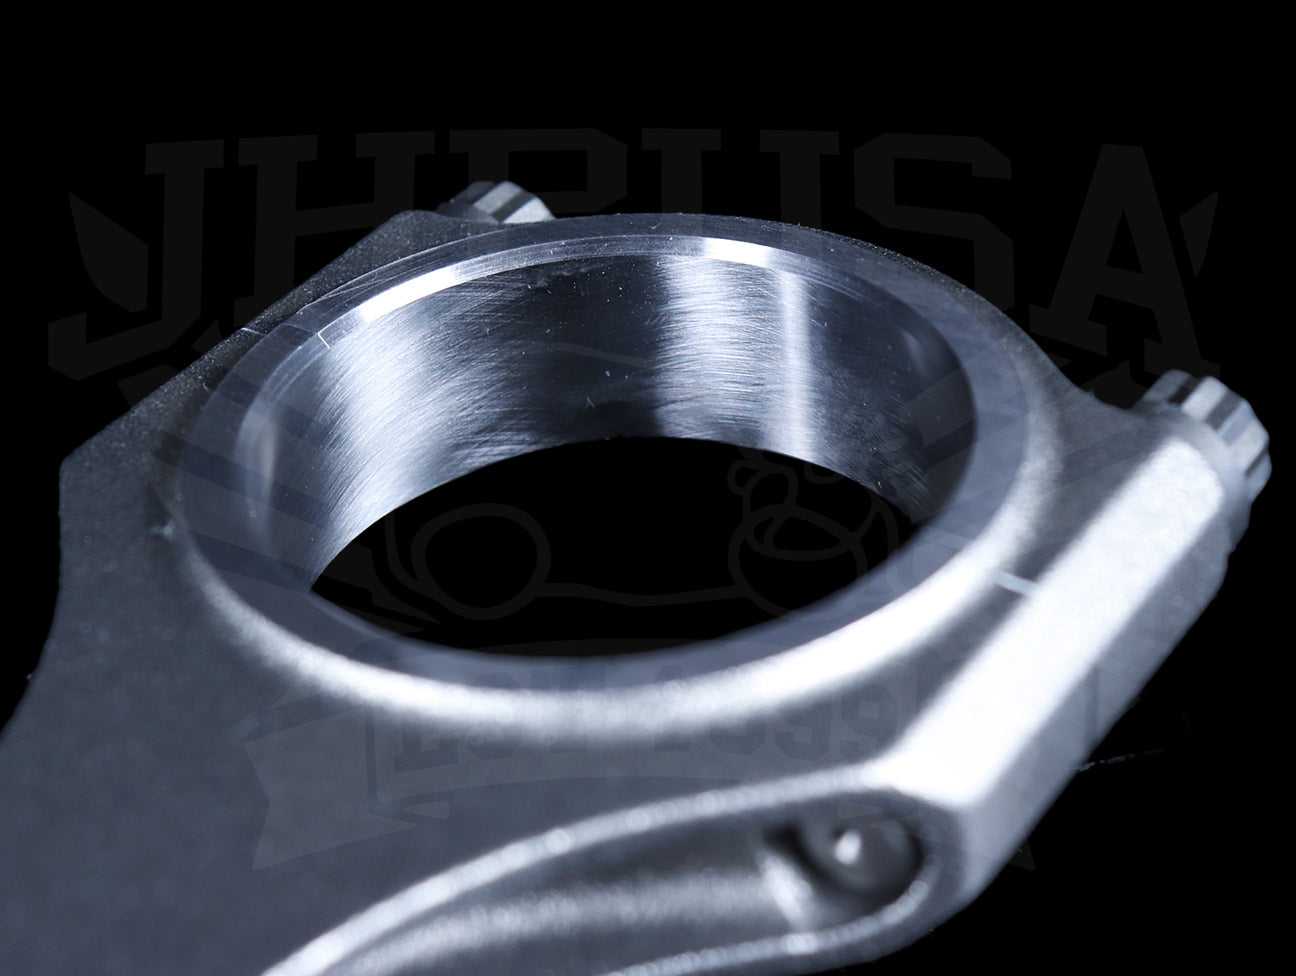 Supertech Forged Connecting Rods - Nissan GTR 6cyl 2.6l Turbo RB26DETT